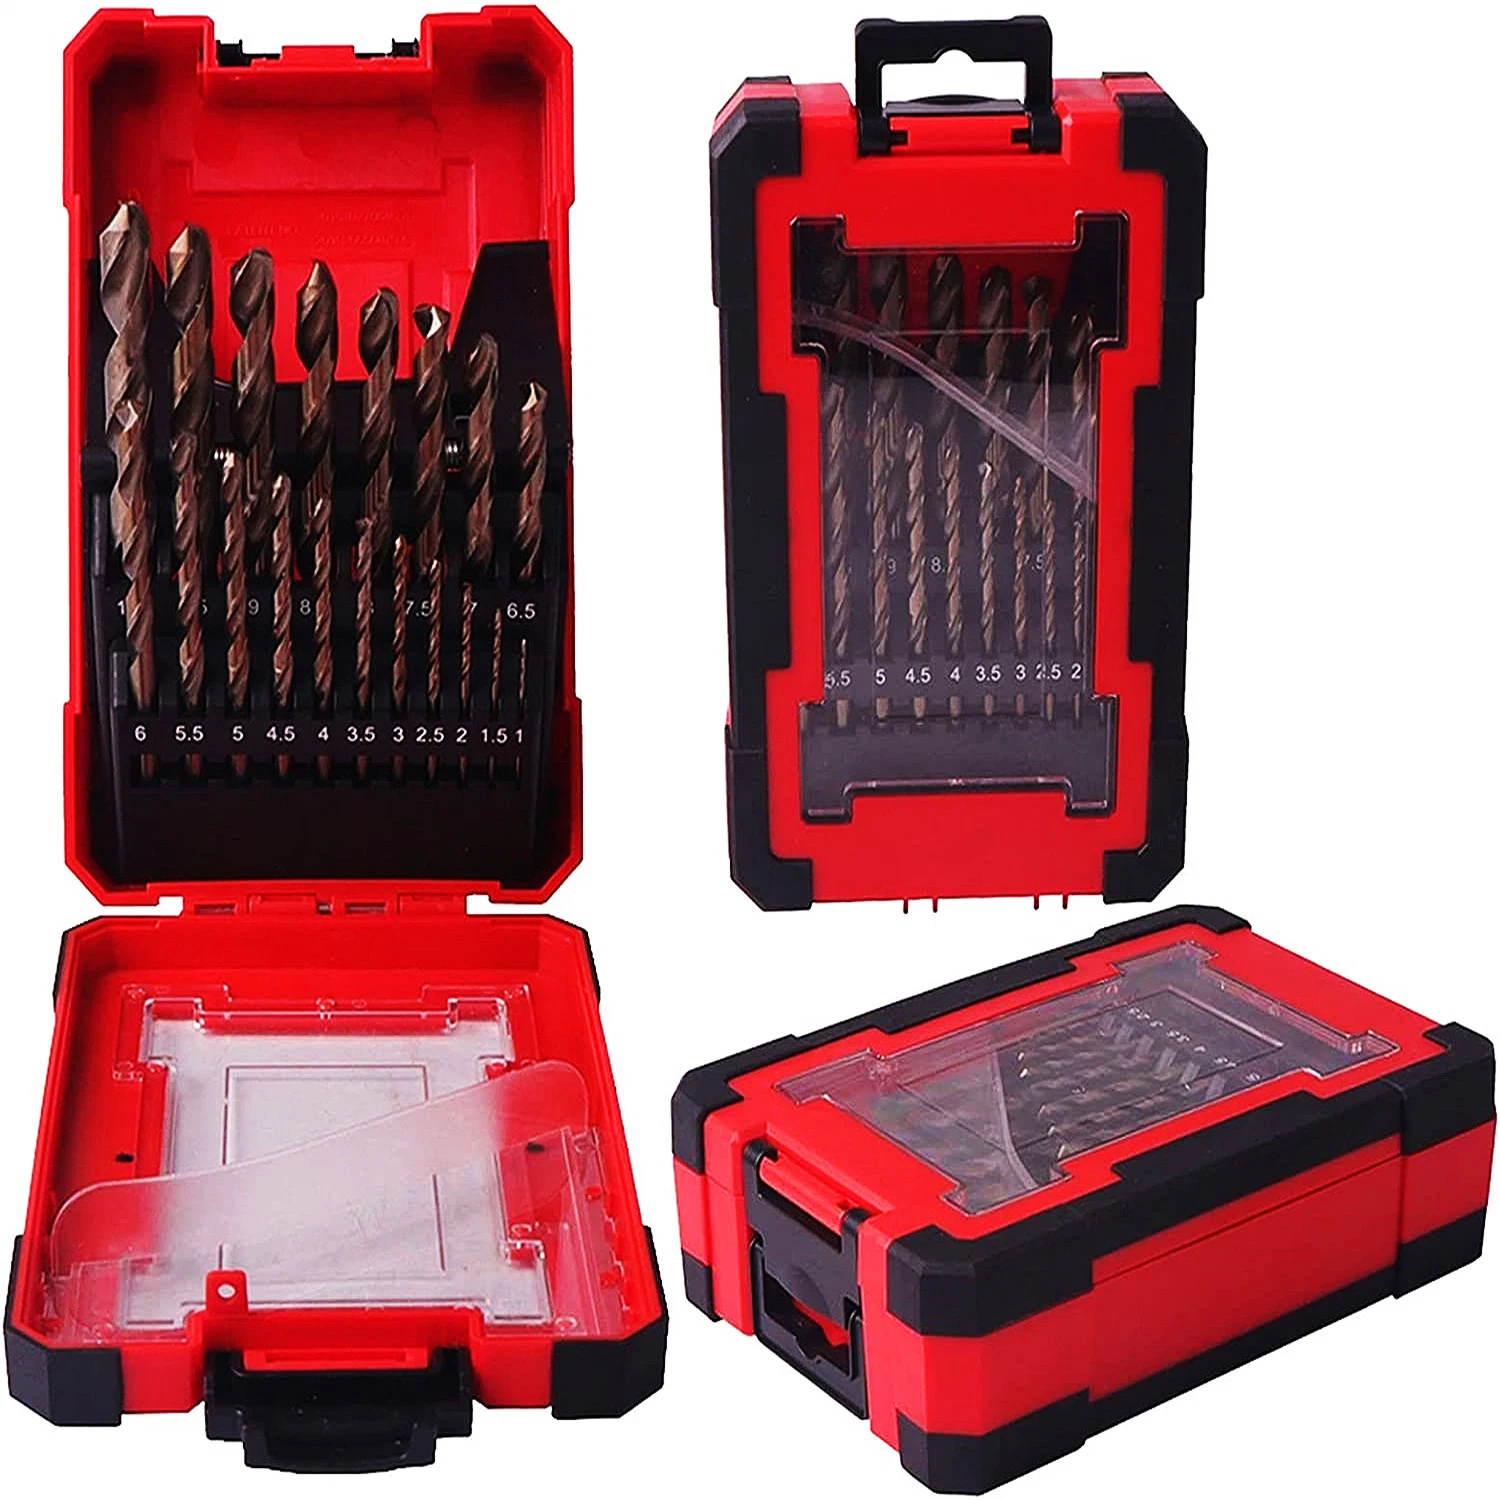 25PC M42 Cobalt Drill Bits Set for Stainless Steel Drilling Bits Power Tools Accessories Step Bits for Metal